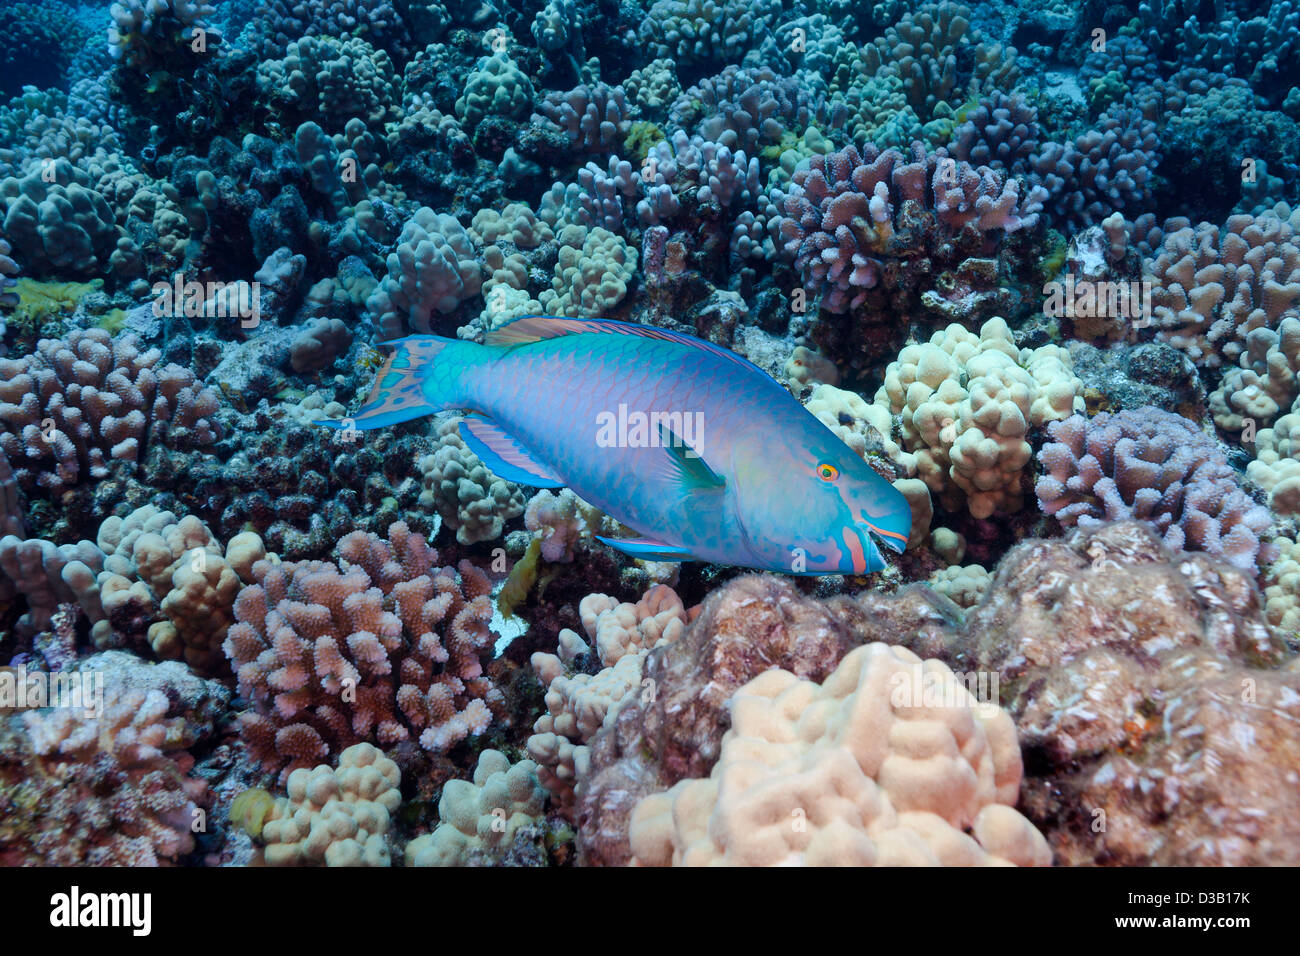 The terminal or final phase of a supermale ember parrotfish, Scarus rubroviolaceus, Hawaii. Stock Photo